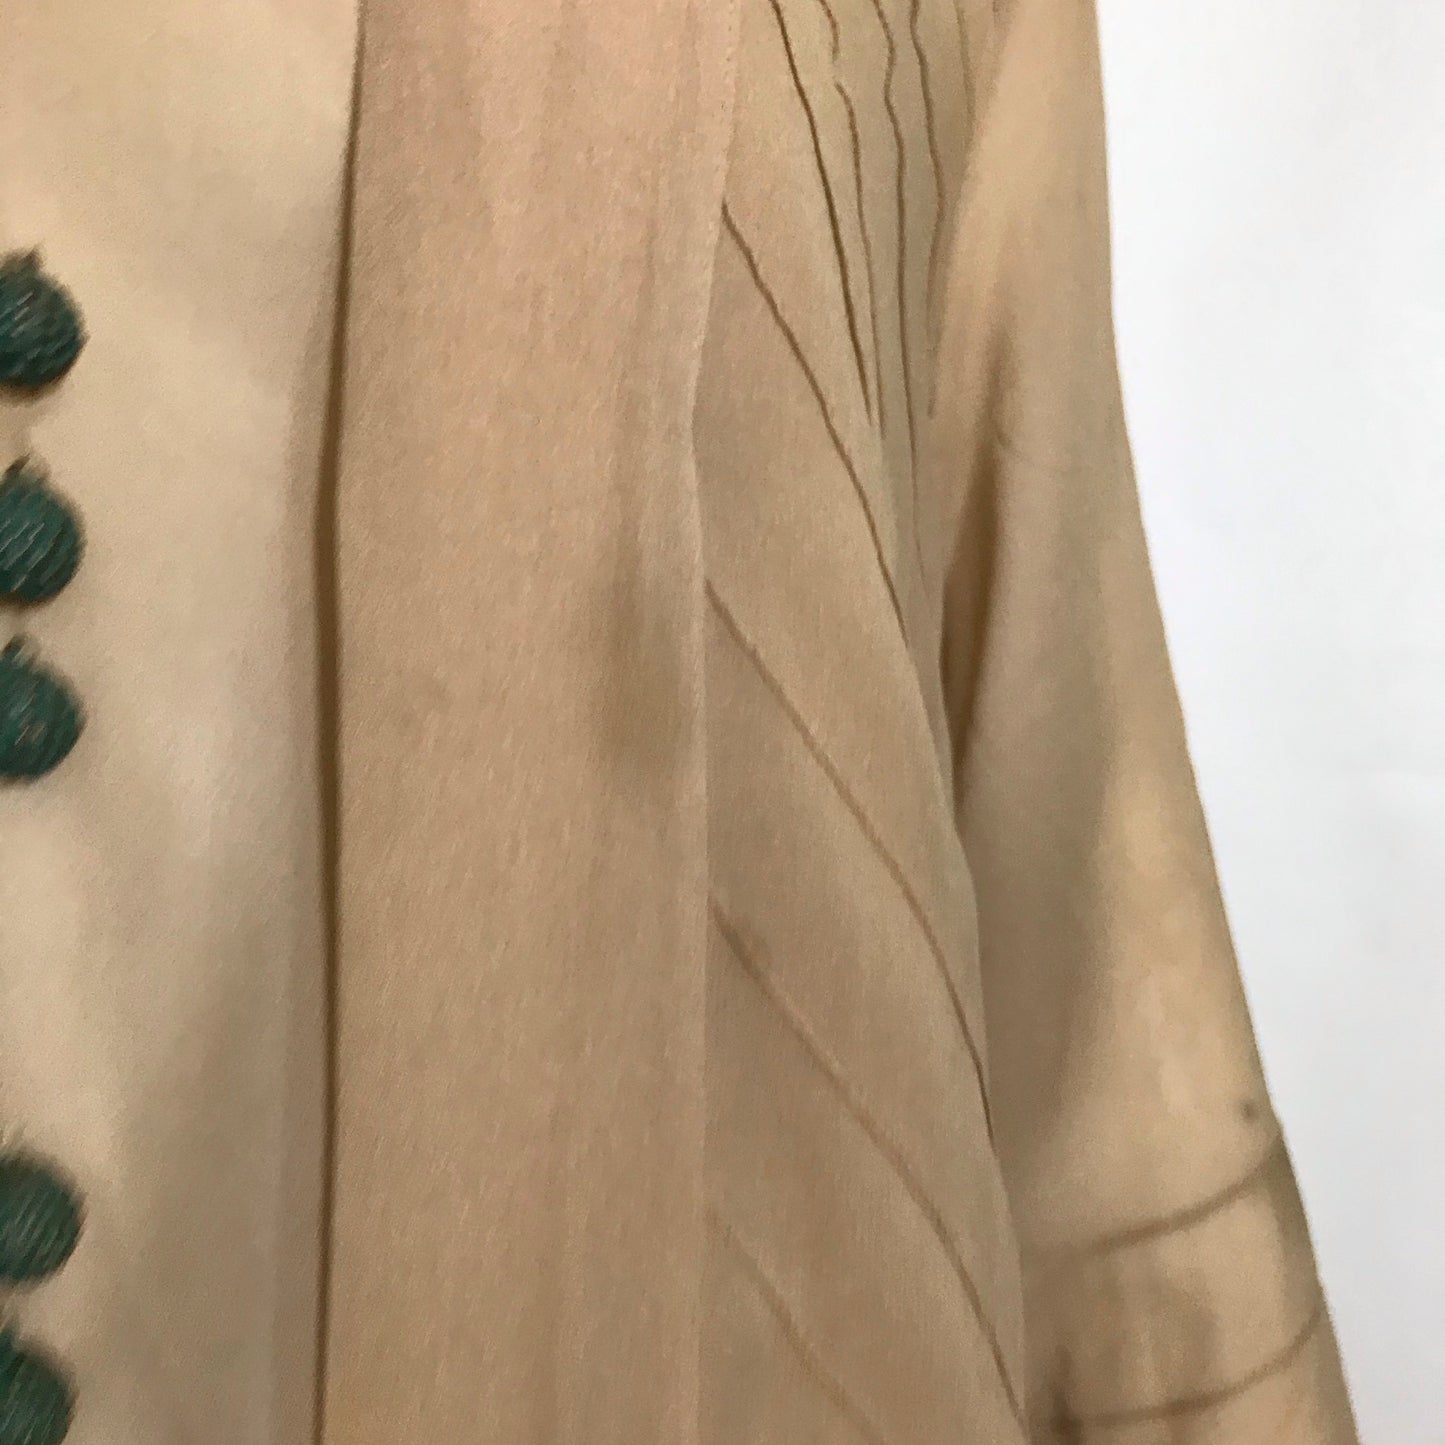 Egyptian Revival Warm Ivory Silk 2 Piece Day Dress with Green Metal Buttons and Braided Silk Sash circa 1920s